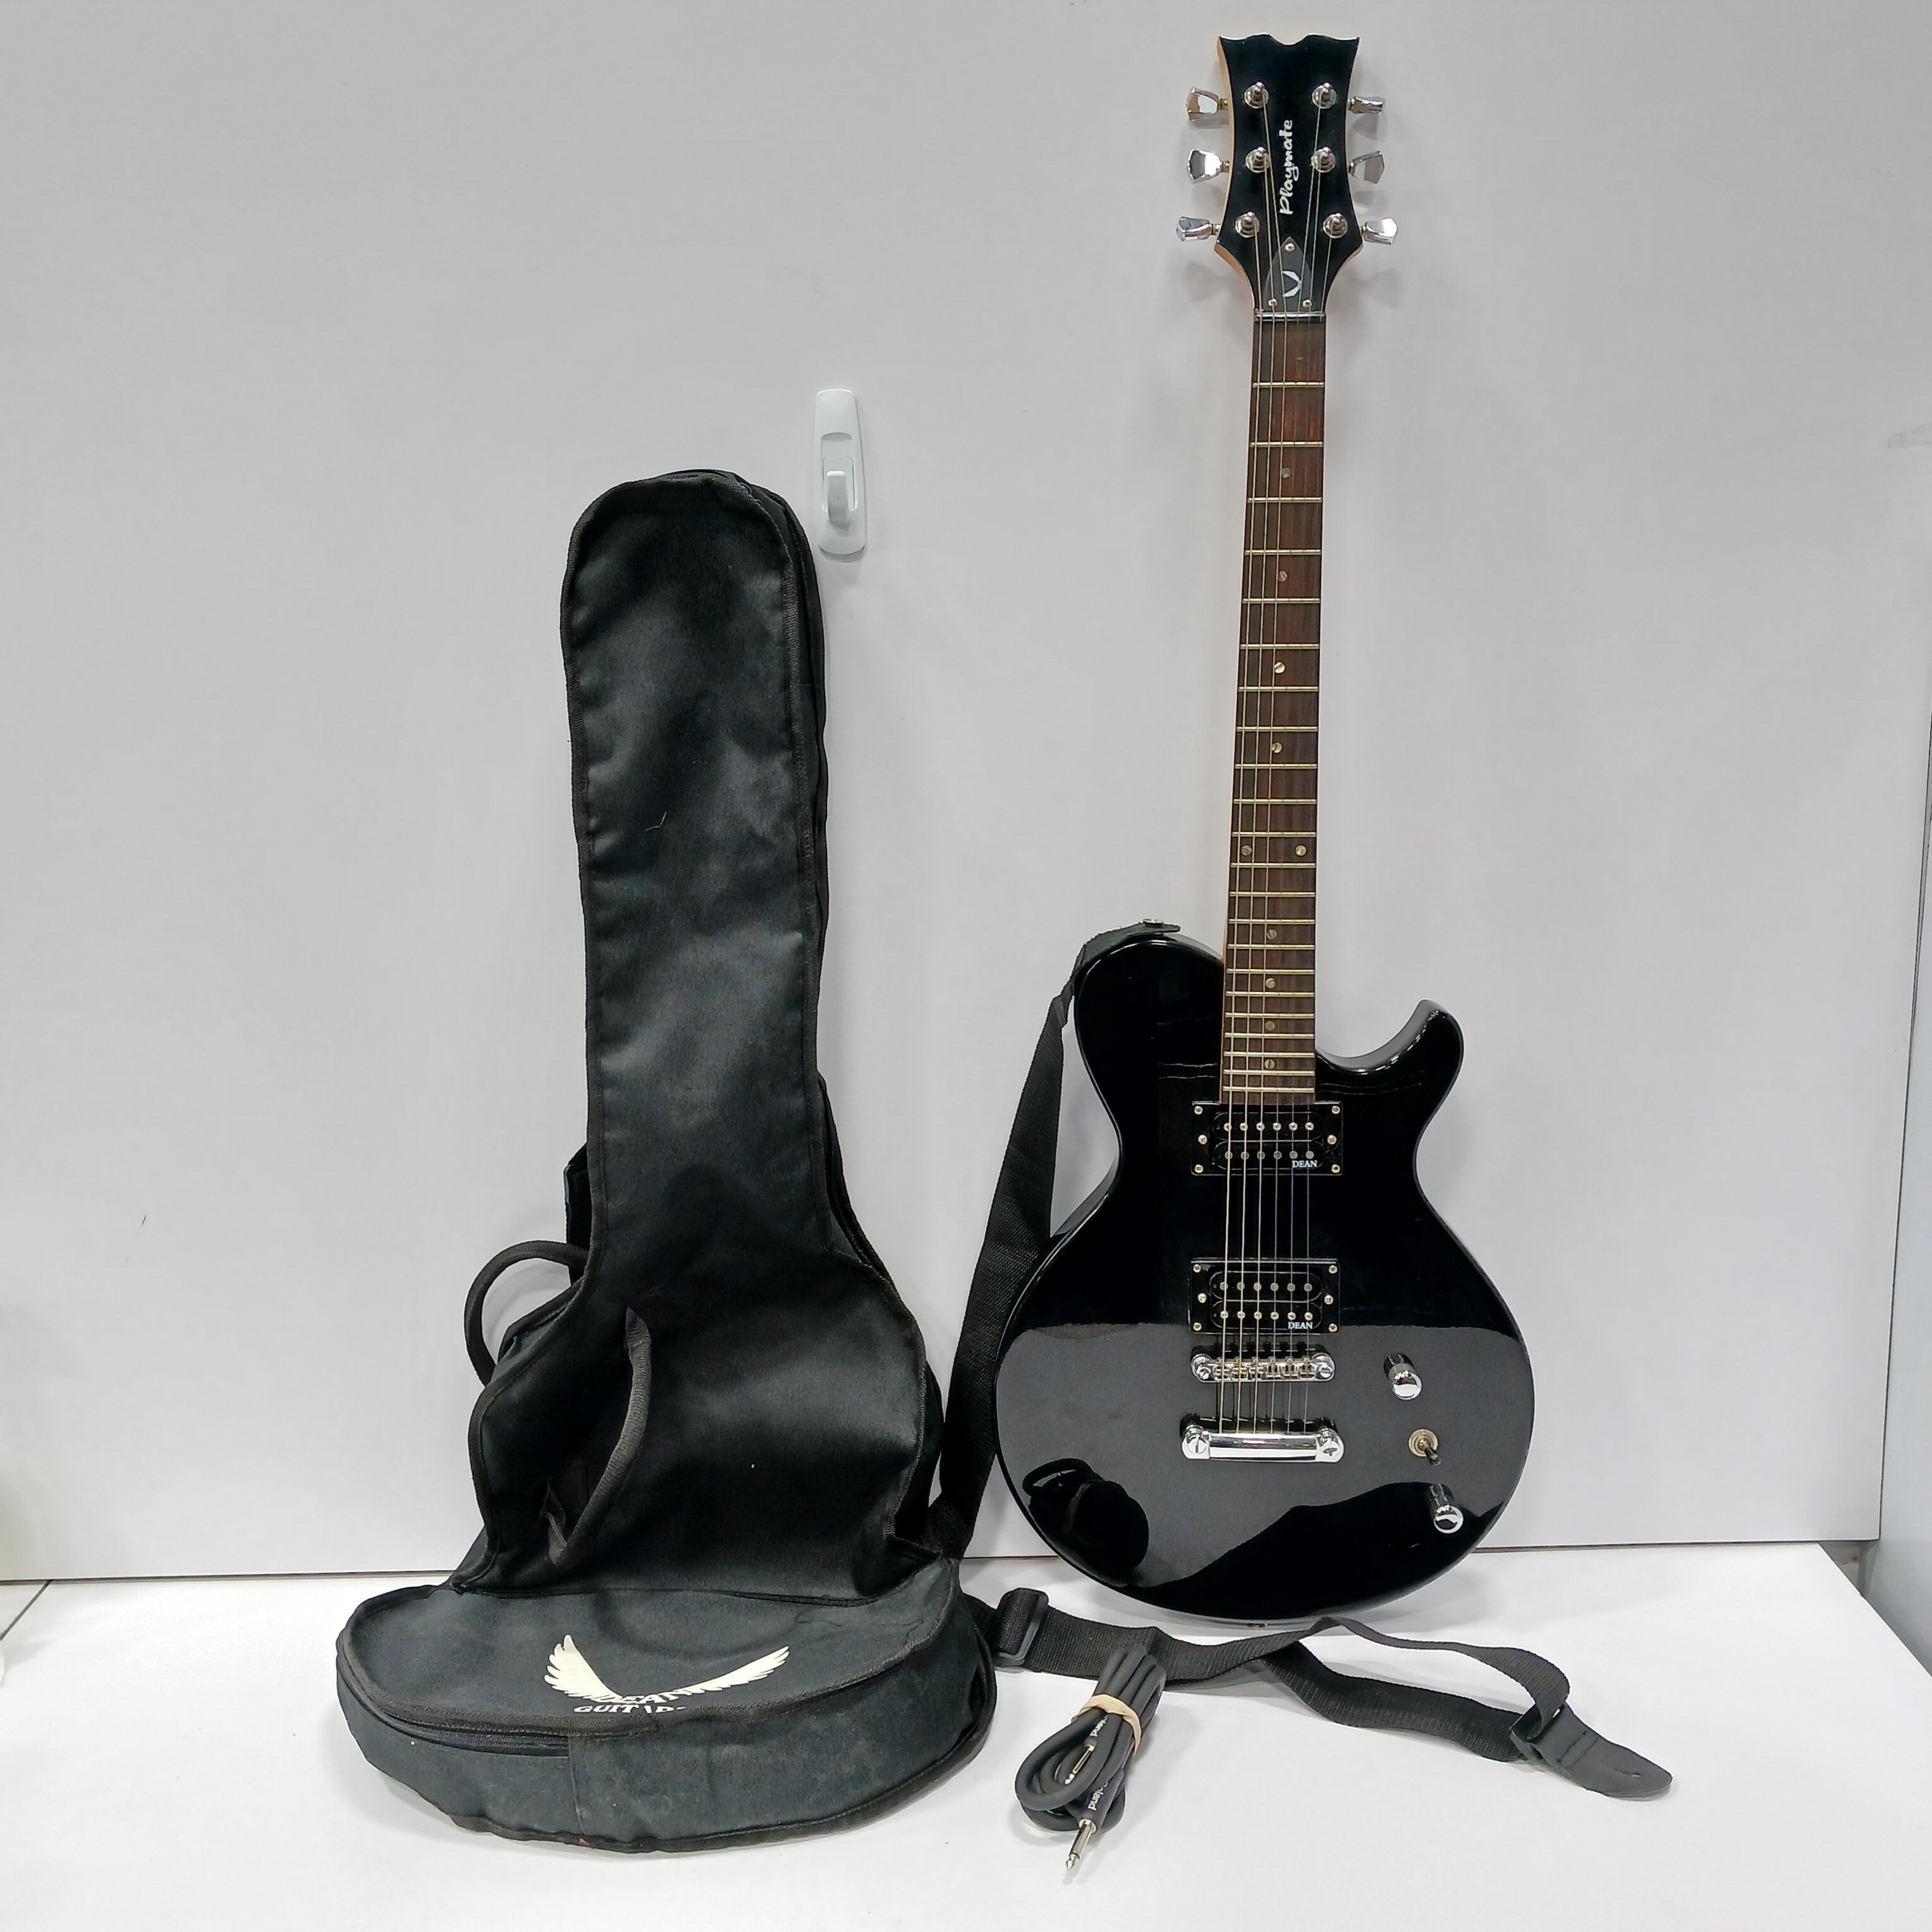 Buy the Playmate Electric Guitar with Gig Bag